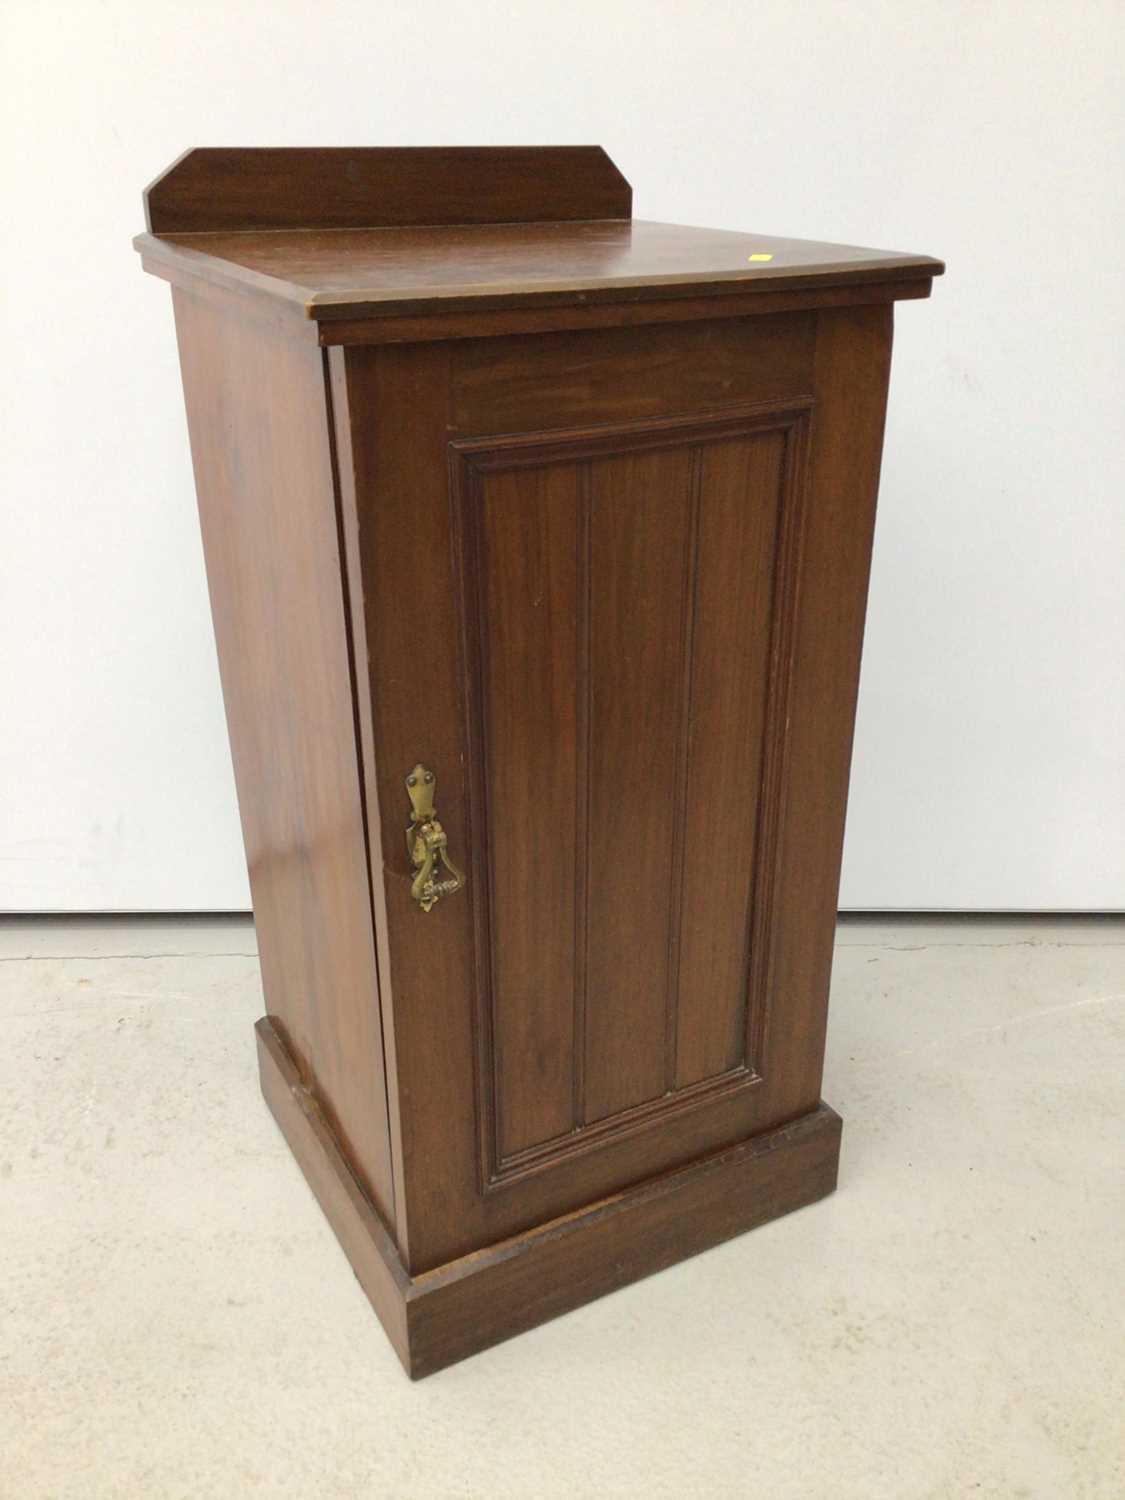 Lot 61 - Late 19th / early 20th century pot cupboard, enclosed by panelled door on plinth base, 43cm wide x 42cm deep x 76cm high, together with a similar cupboard. (2)